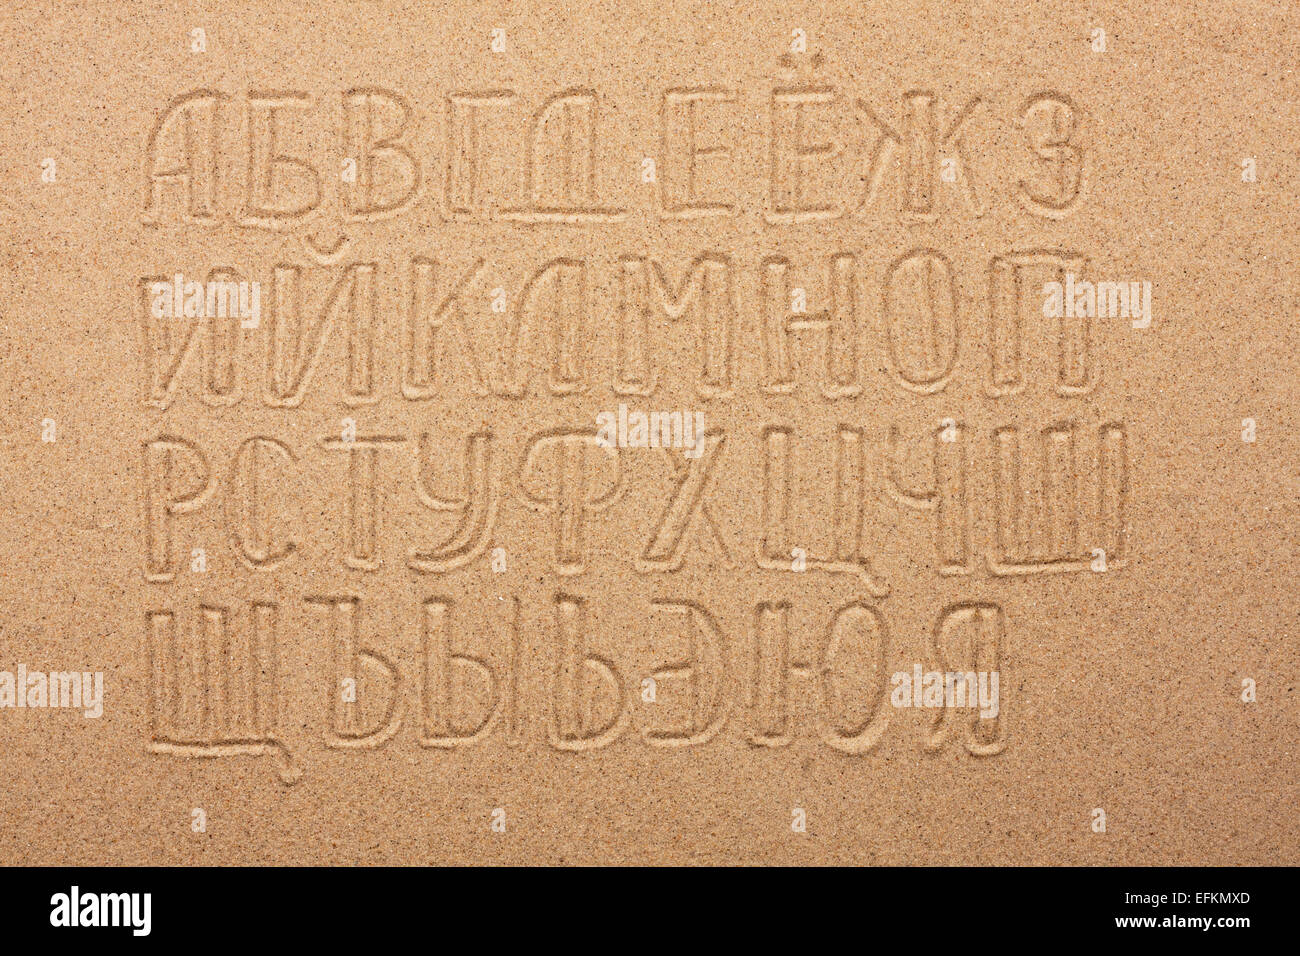 Russian alphabet  written on the sand, as background Stock Photo